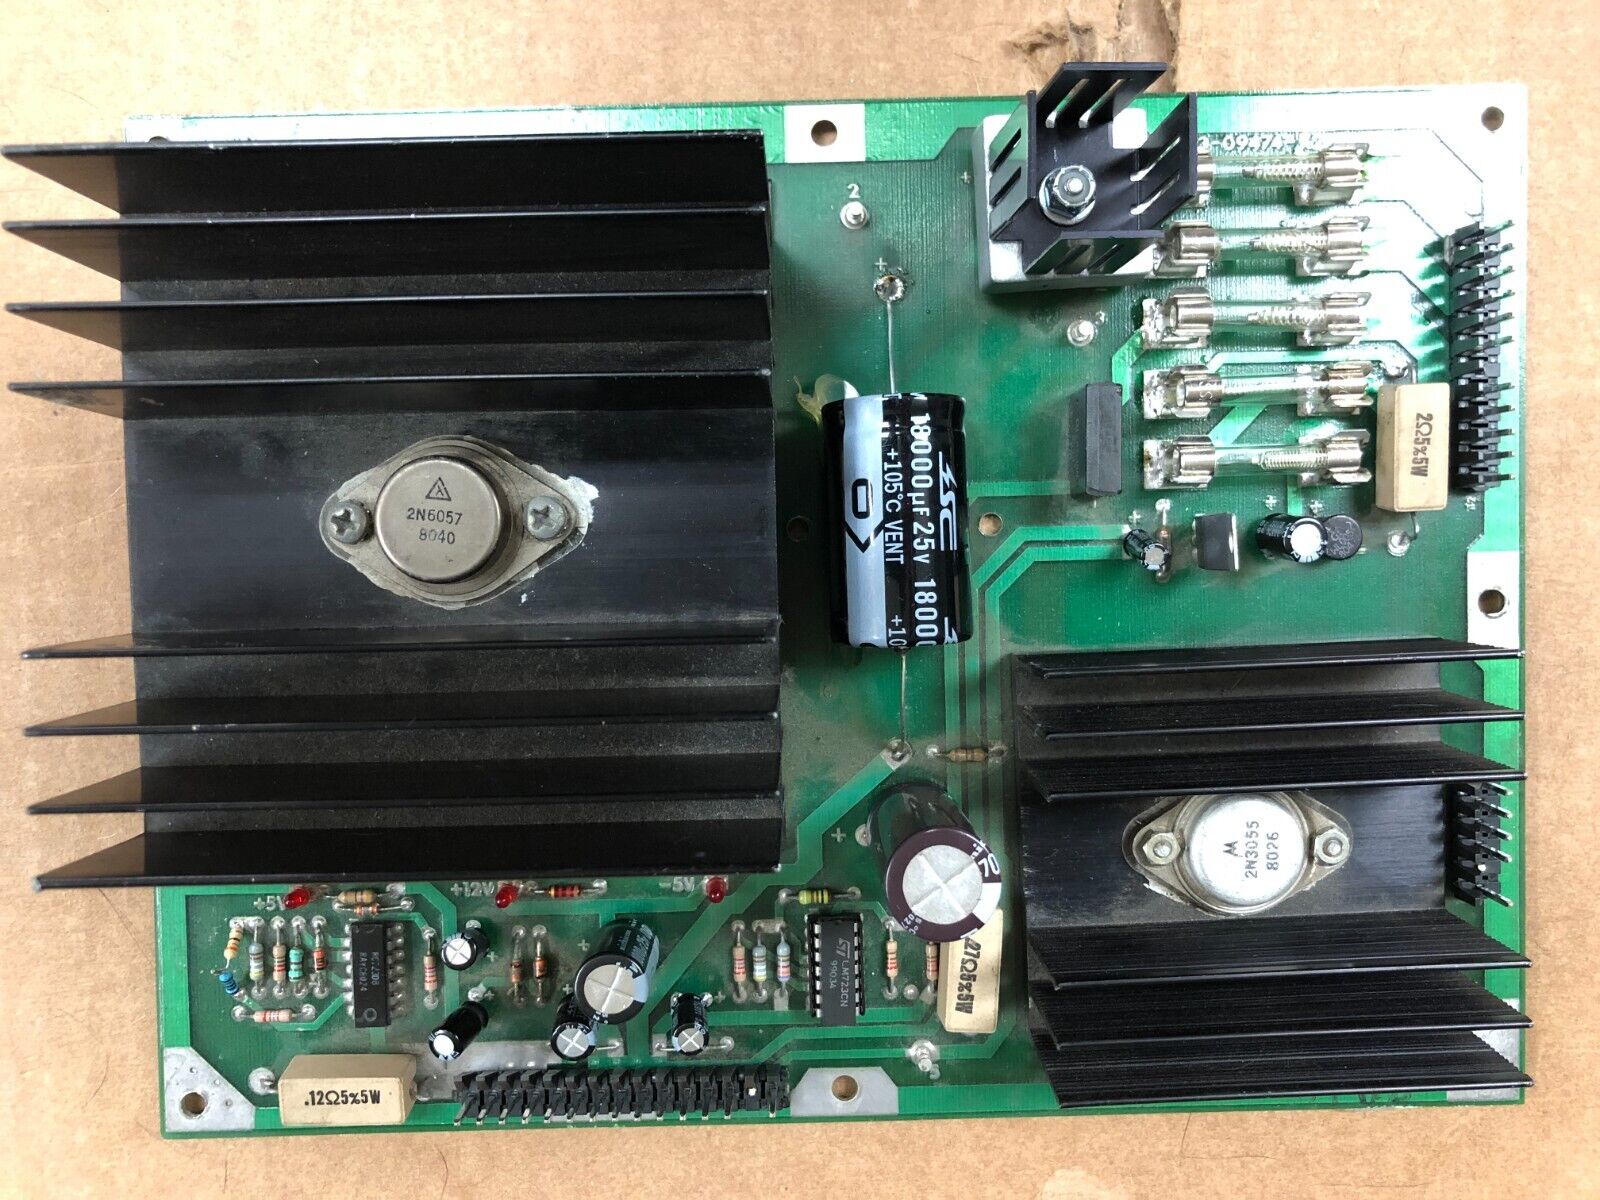 William's Stargate POWER SUPPLY BOARD repair & complete rebuild with NEW PARTS